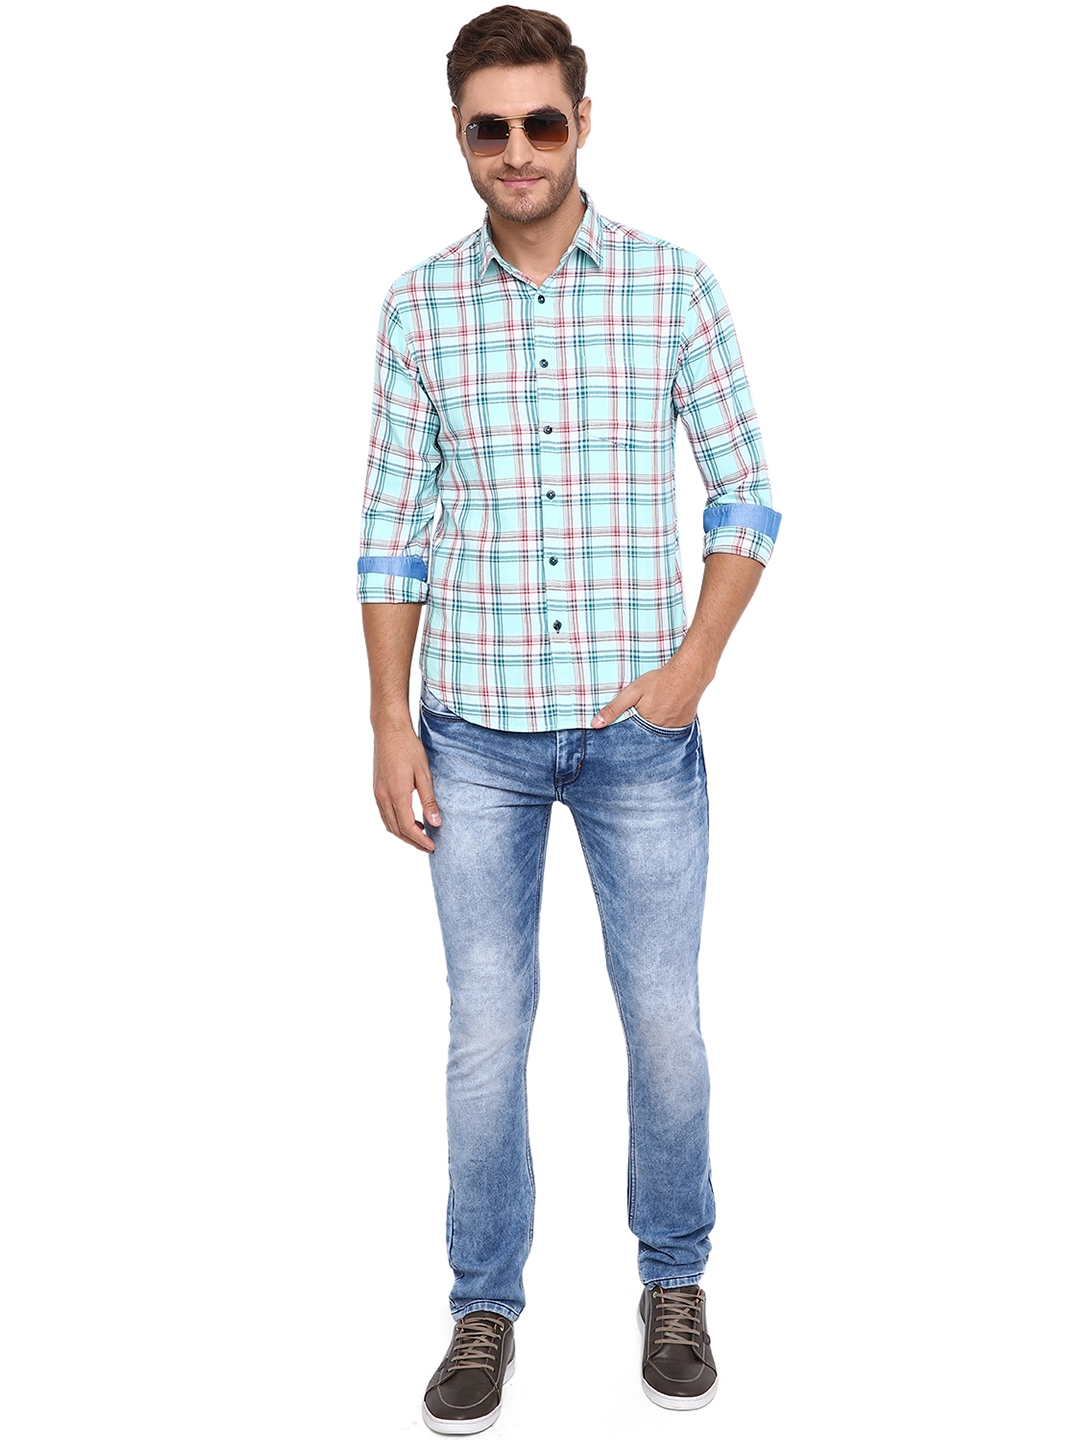 Greenfibre | Sky Blue Checked Slim Fit Casual Shirt | Greenfibre 3